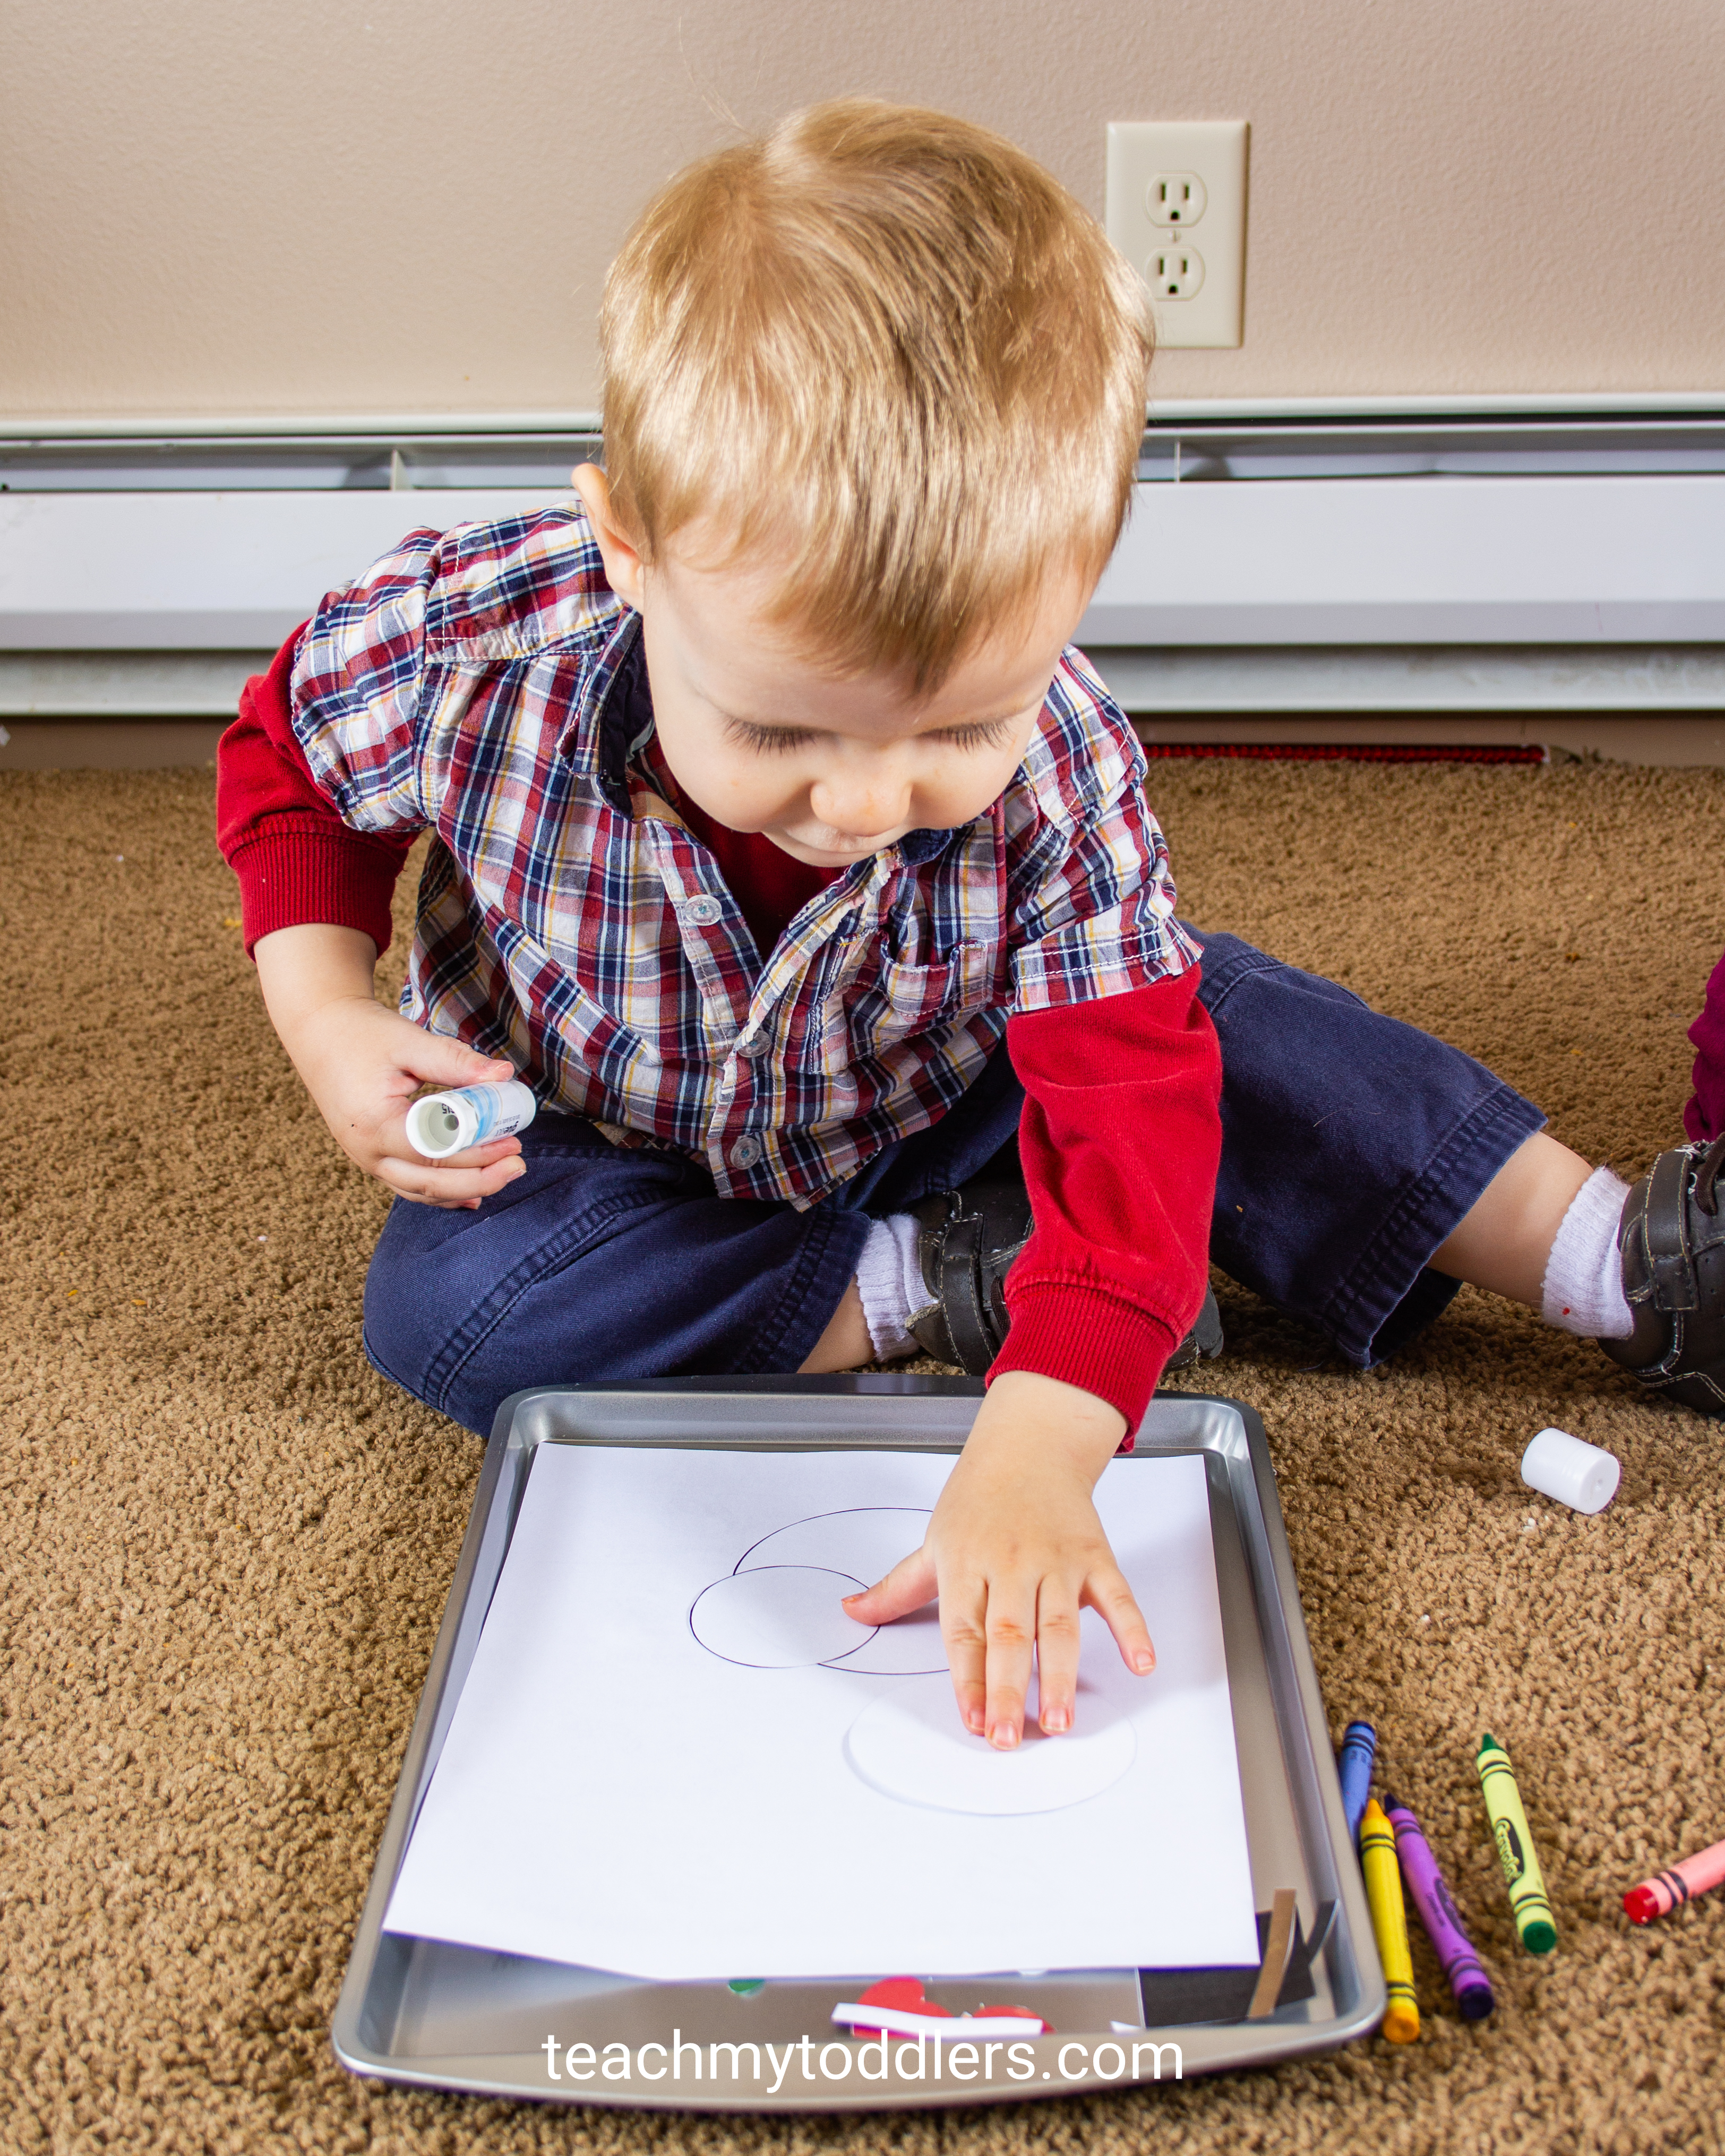 Use these awesome winter activities to teach toddlers about winter